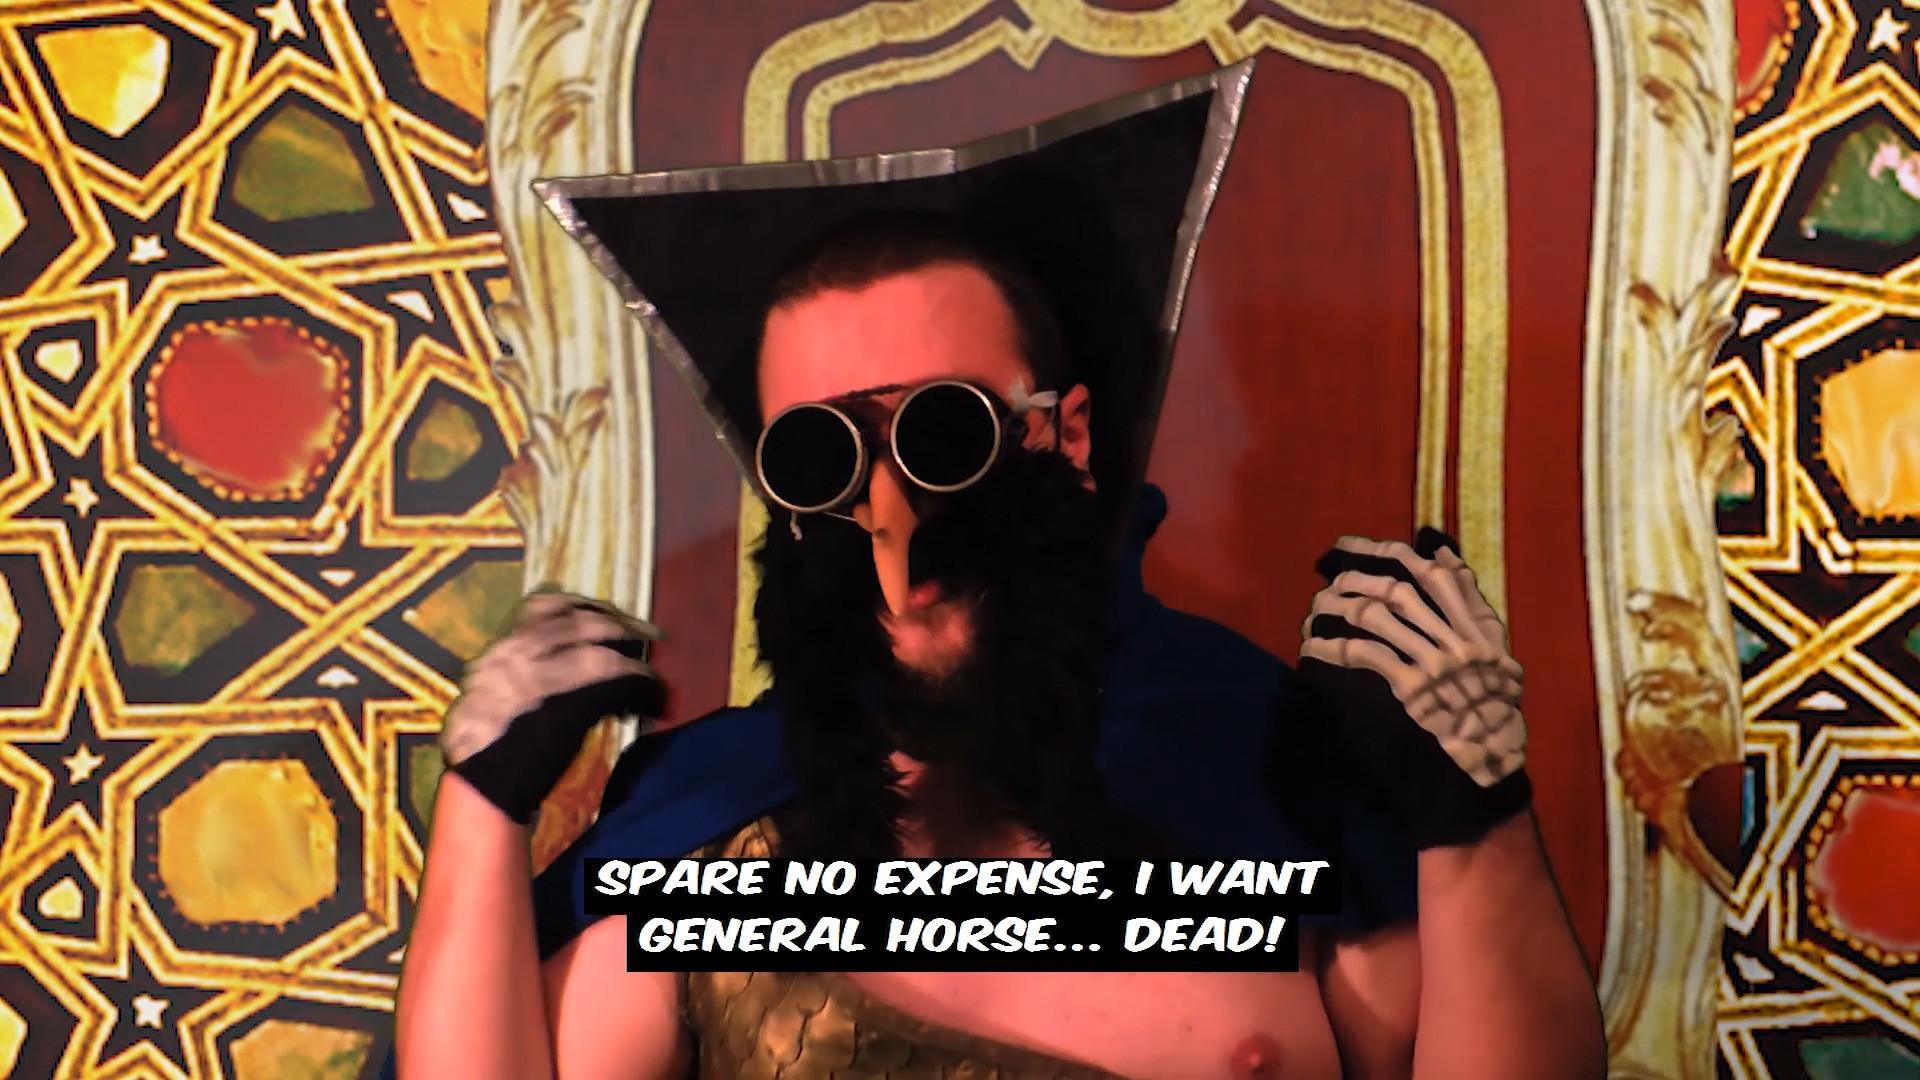 General Horse and the Package of Doom Free Download